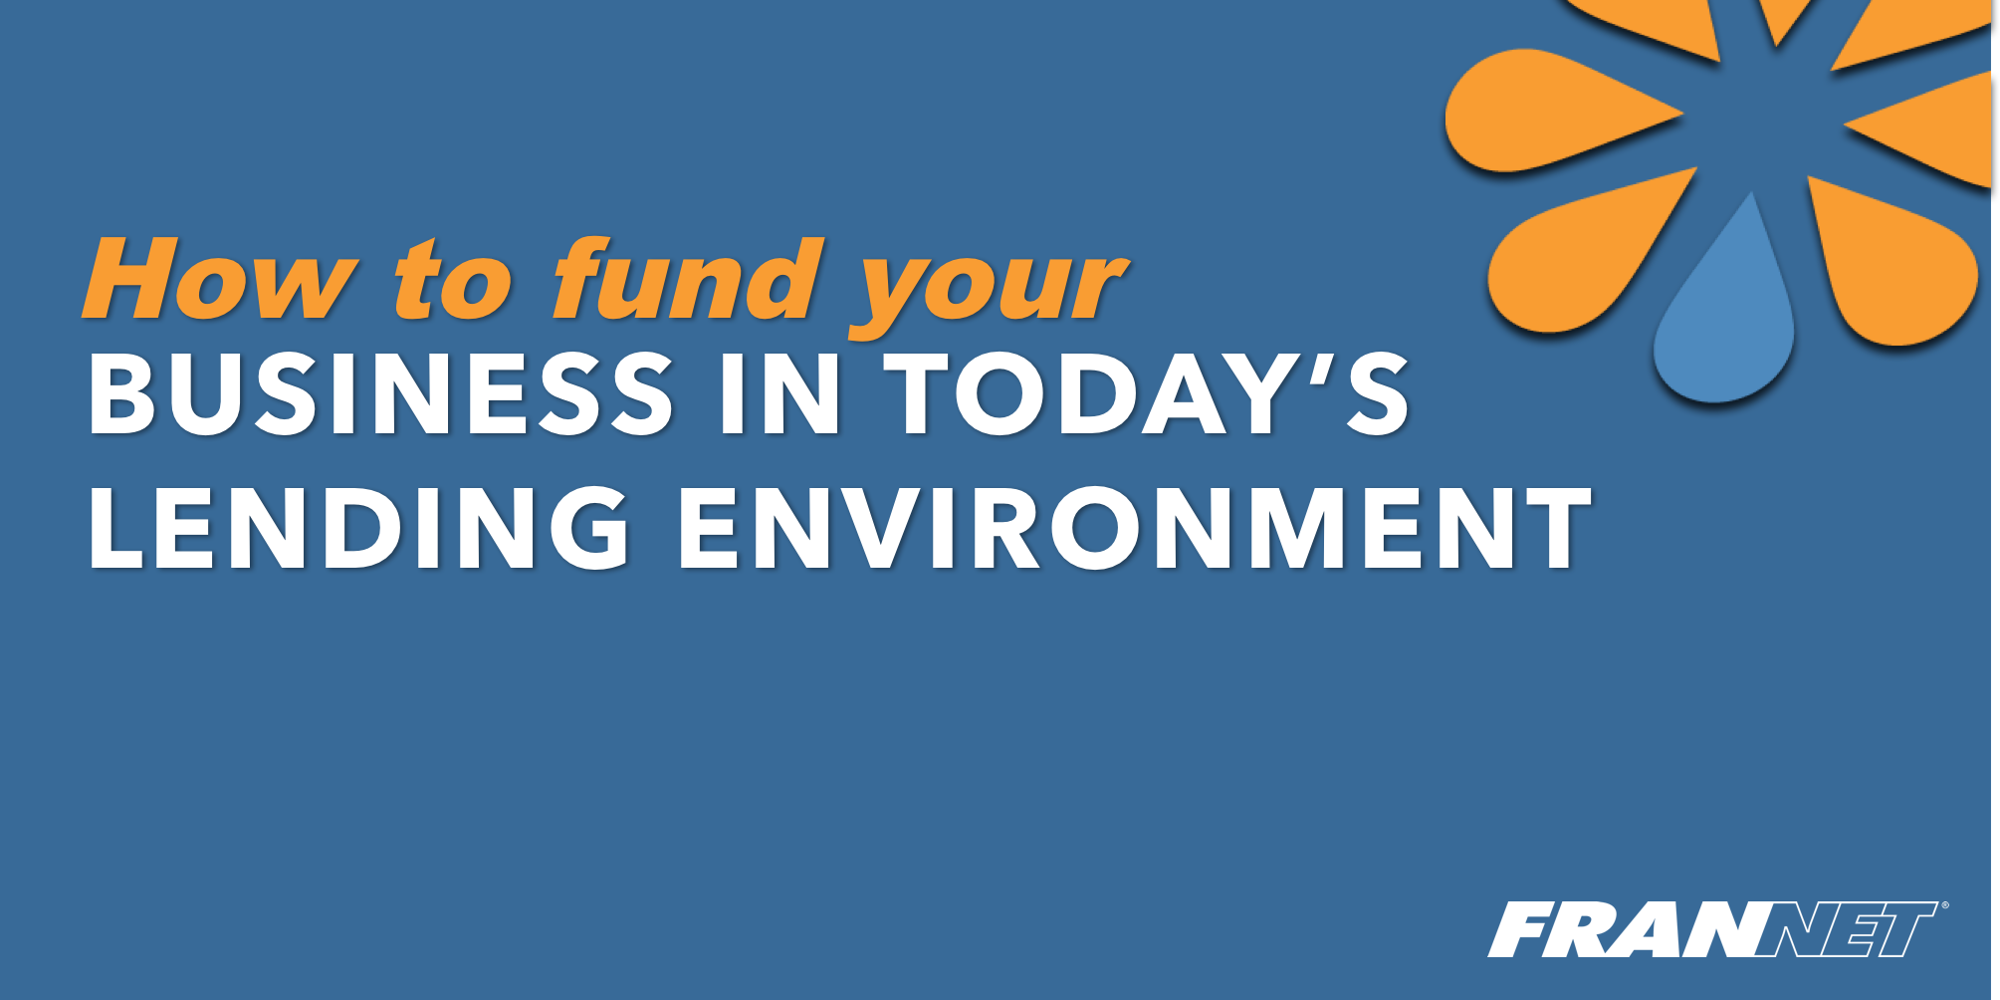 Learn How to Fund Your Business in Today's Lending Environment! promotional image